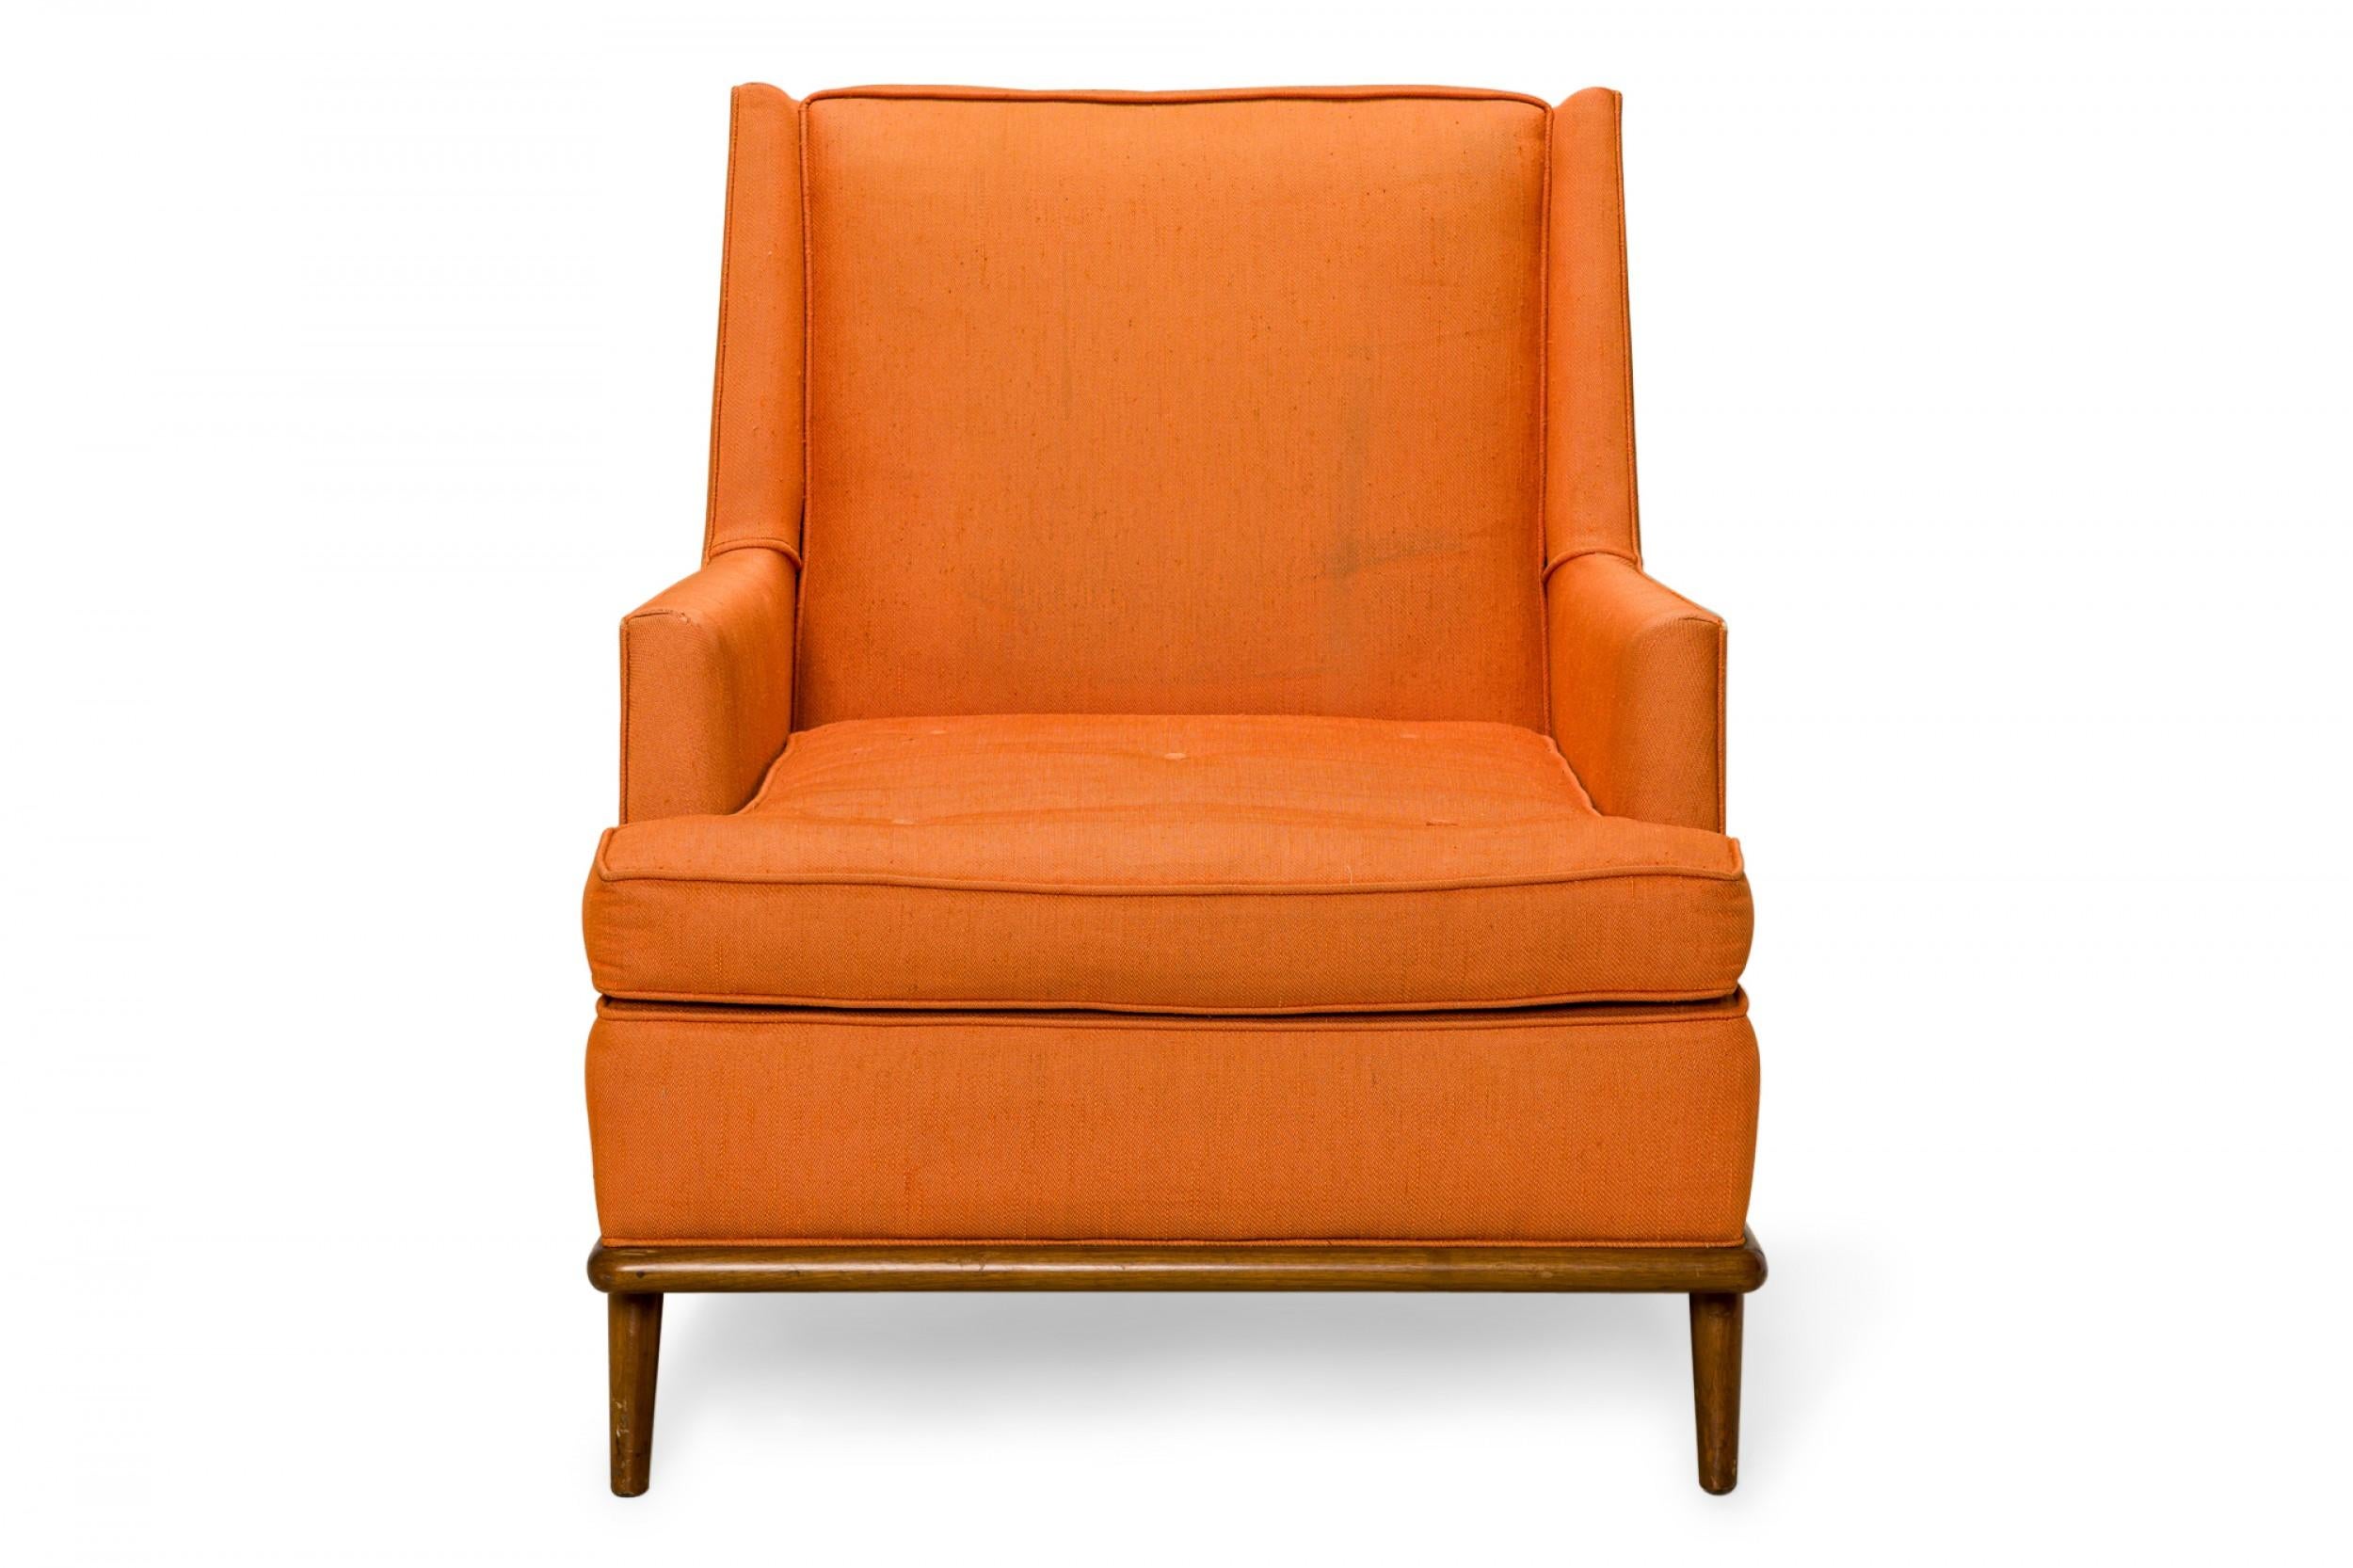 American mid-century lounge armchair with a high back and bright orange fabric upholstery, resting on a walnut base with four short tapered dowel legs. (T.H. ROBSJOHN-GIBBINGS FOR WIDDICOMB)
 